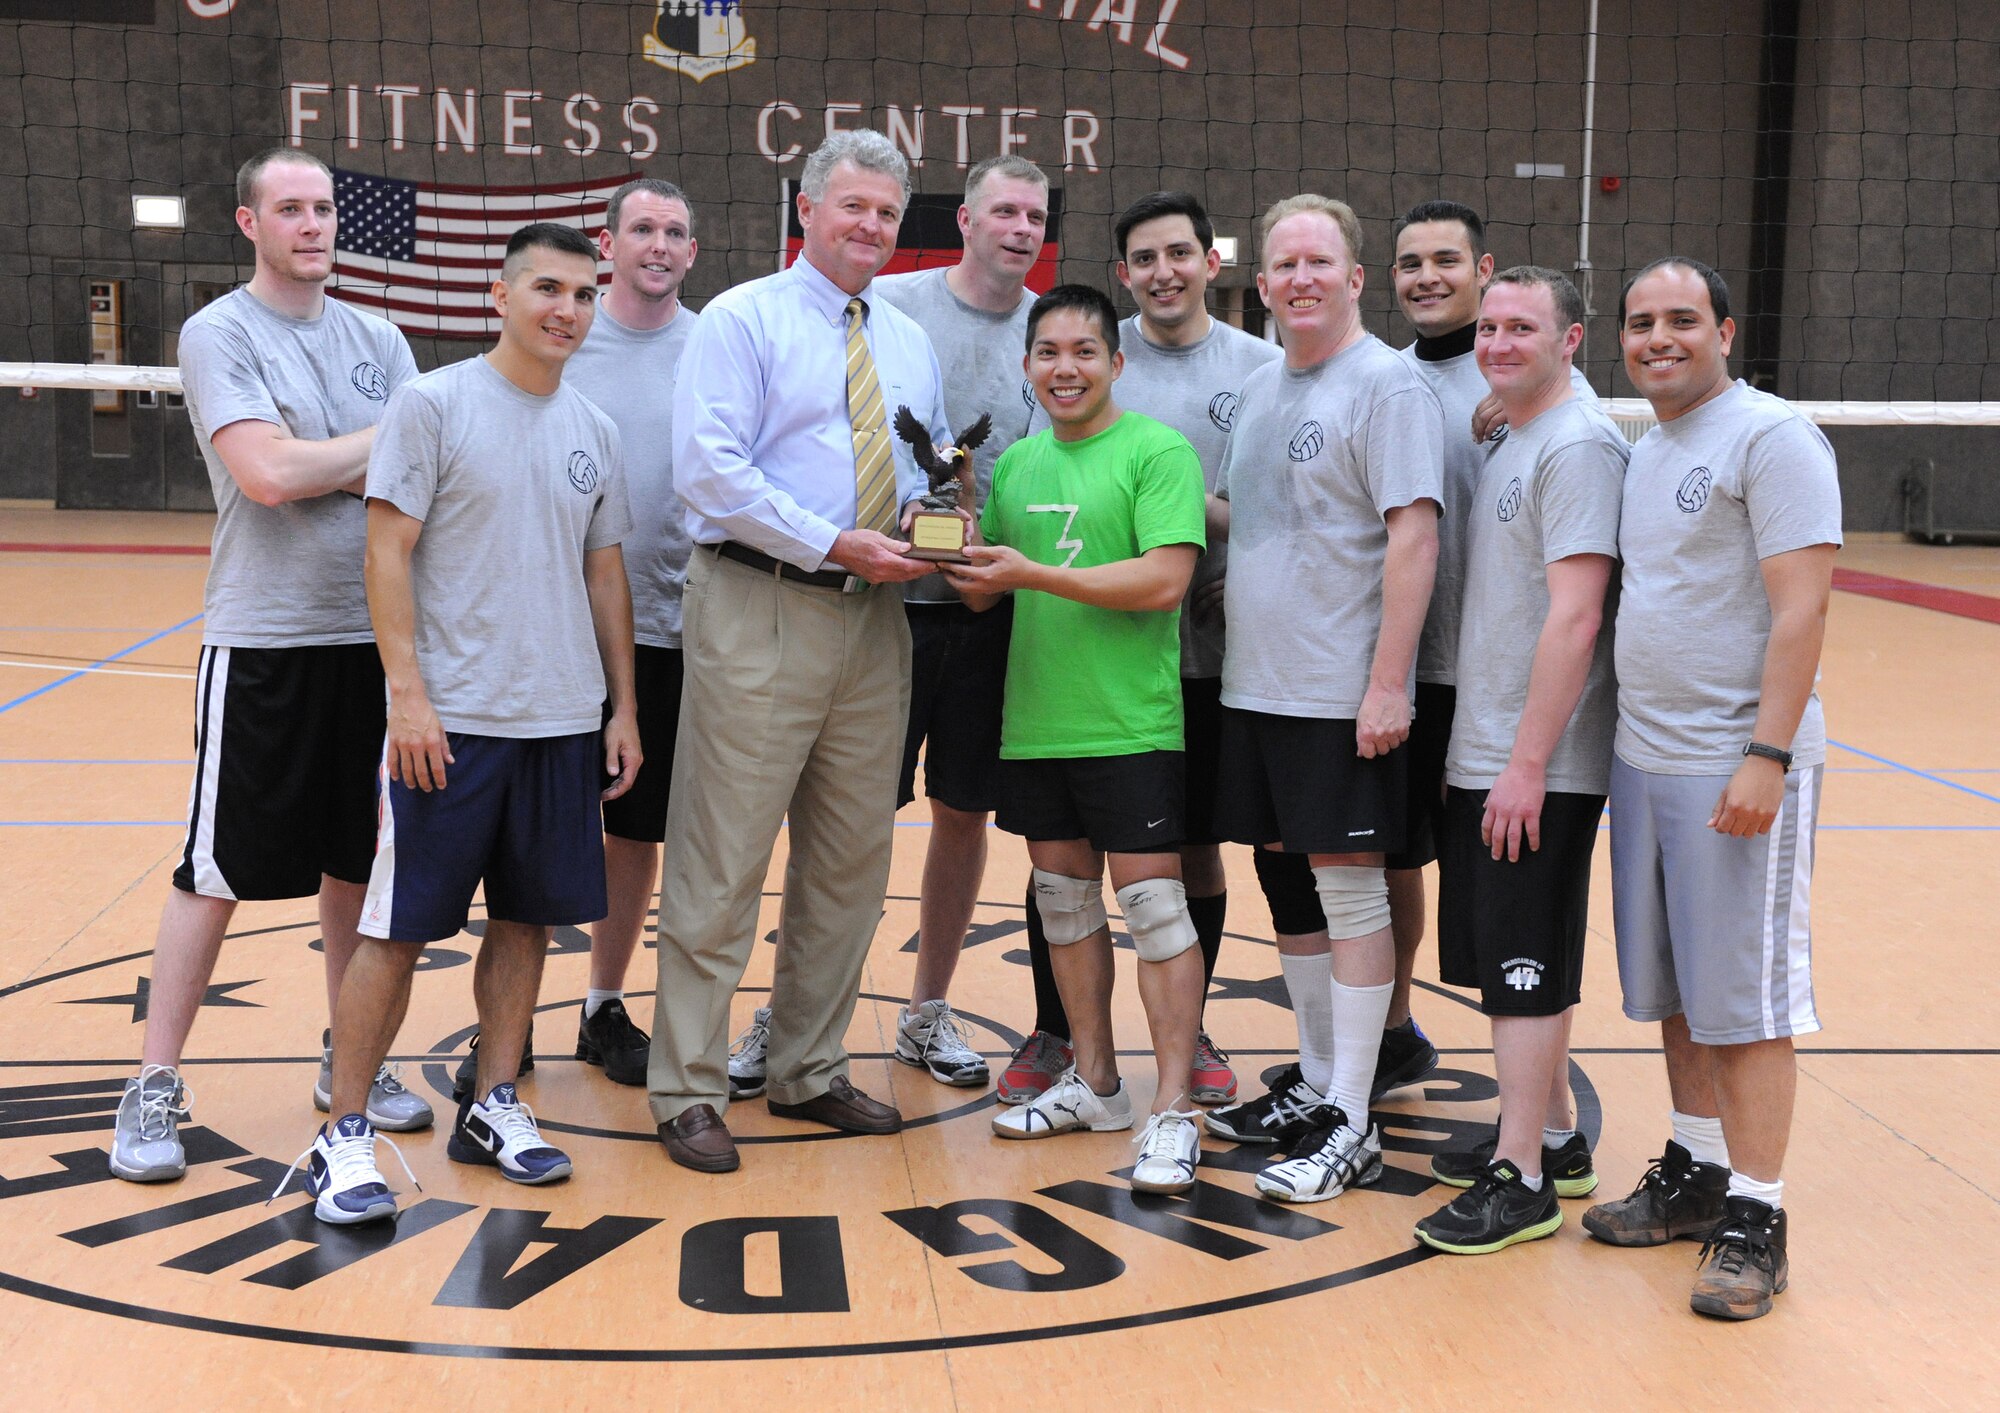 SPANGDAHLEM AIR BASE, Germany –Woodrow Wilson, 52nd Force Support Squadron deputy commander, presents the 52nd Fighter Wing Intramural Volleyball League trophy to the 52nd Civil Engineer Squadron here May 9. The CES defeated the 52nd Medical Group 25-16, 19-25, 15-10 to become the intramural volleyball champions. (U.S. Air Force photo/Senior Airman Nathanael Callon)